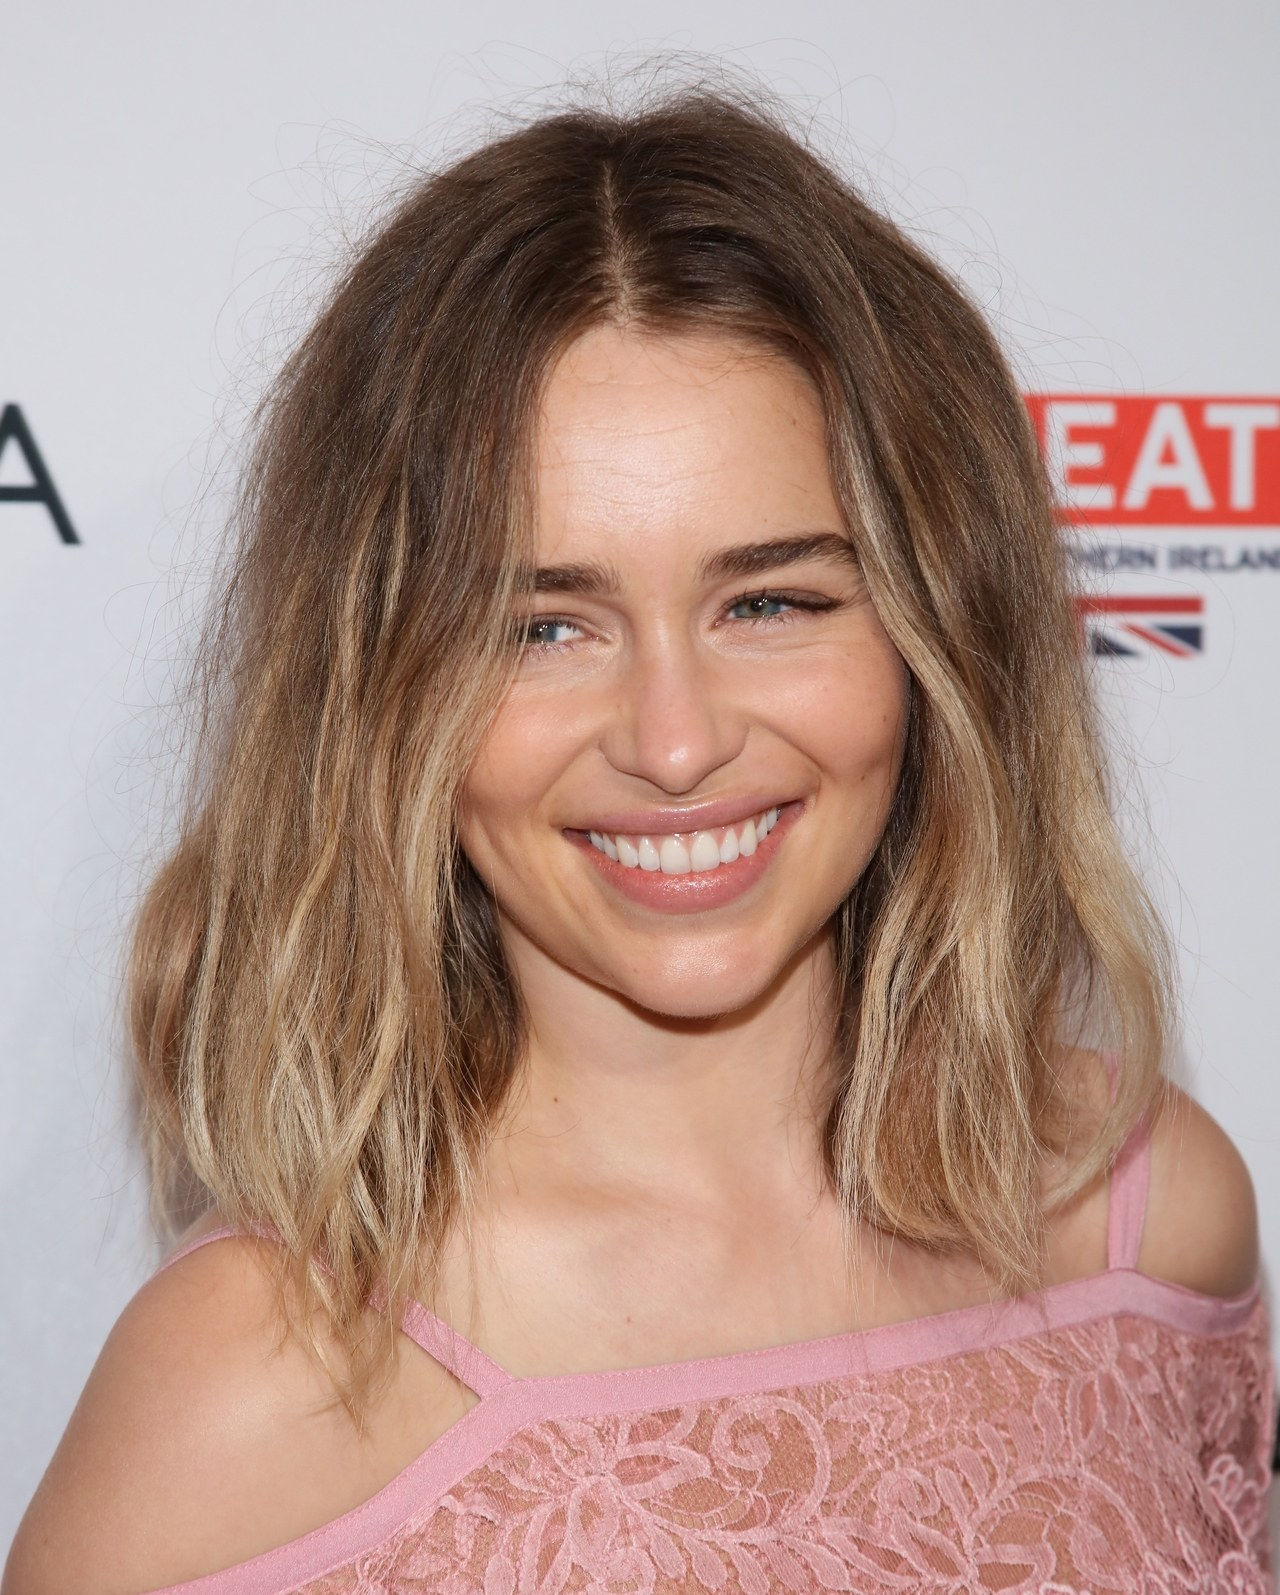 OESTE HOLLYWOOD, CA - SEPTEMBER 17: Actress Emilia Clarke attends the BBC America BAFTA Los Angeles TV Tea Party at The London Hotel on September 17, 2016 in West Hollywood, California. (Photo by JB Lacroix/WireImage)